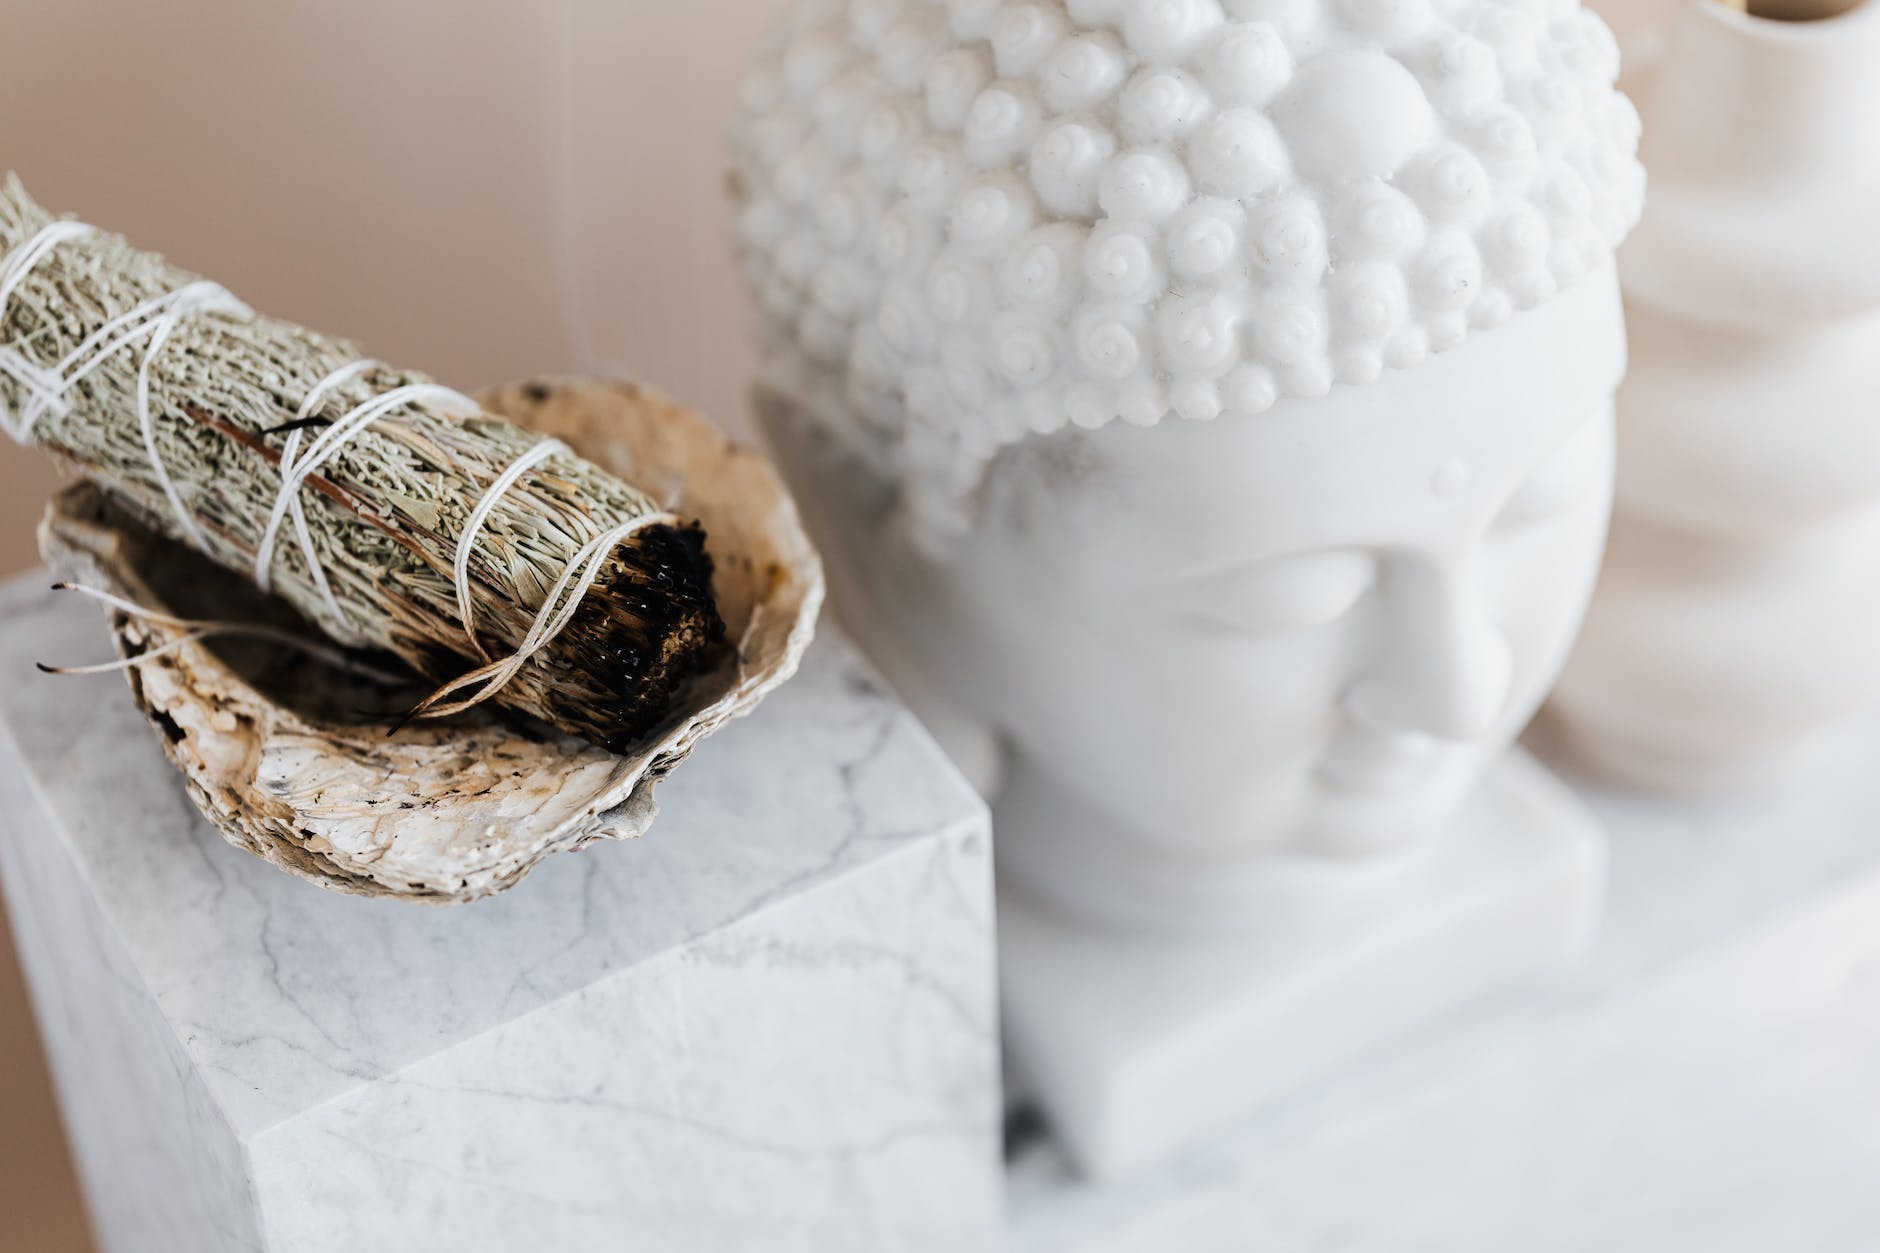 Quote challenge day 3 header shows sage smudge stick in bowl on marble shelf near buddha head